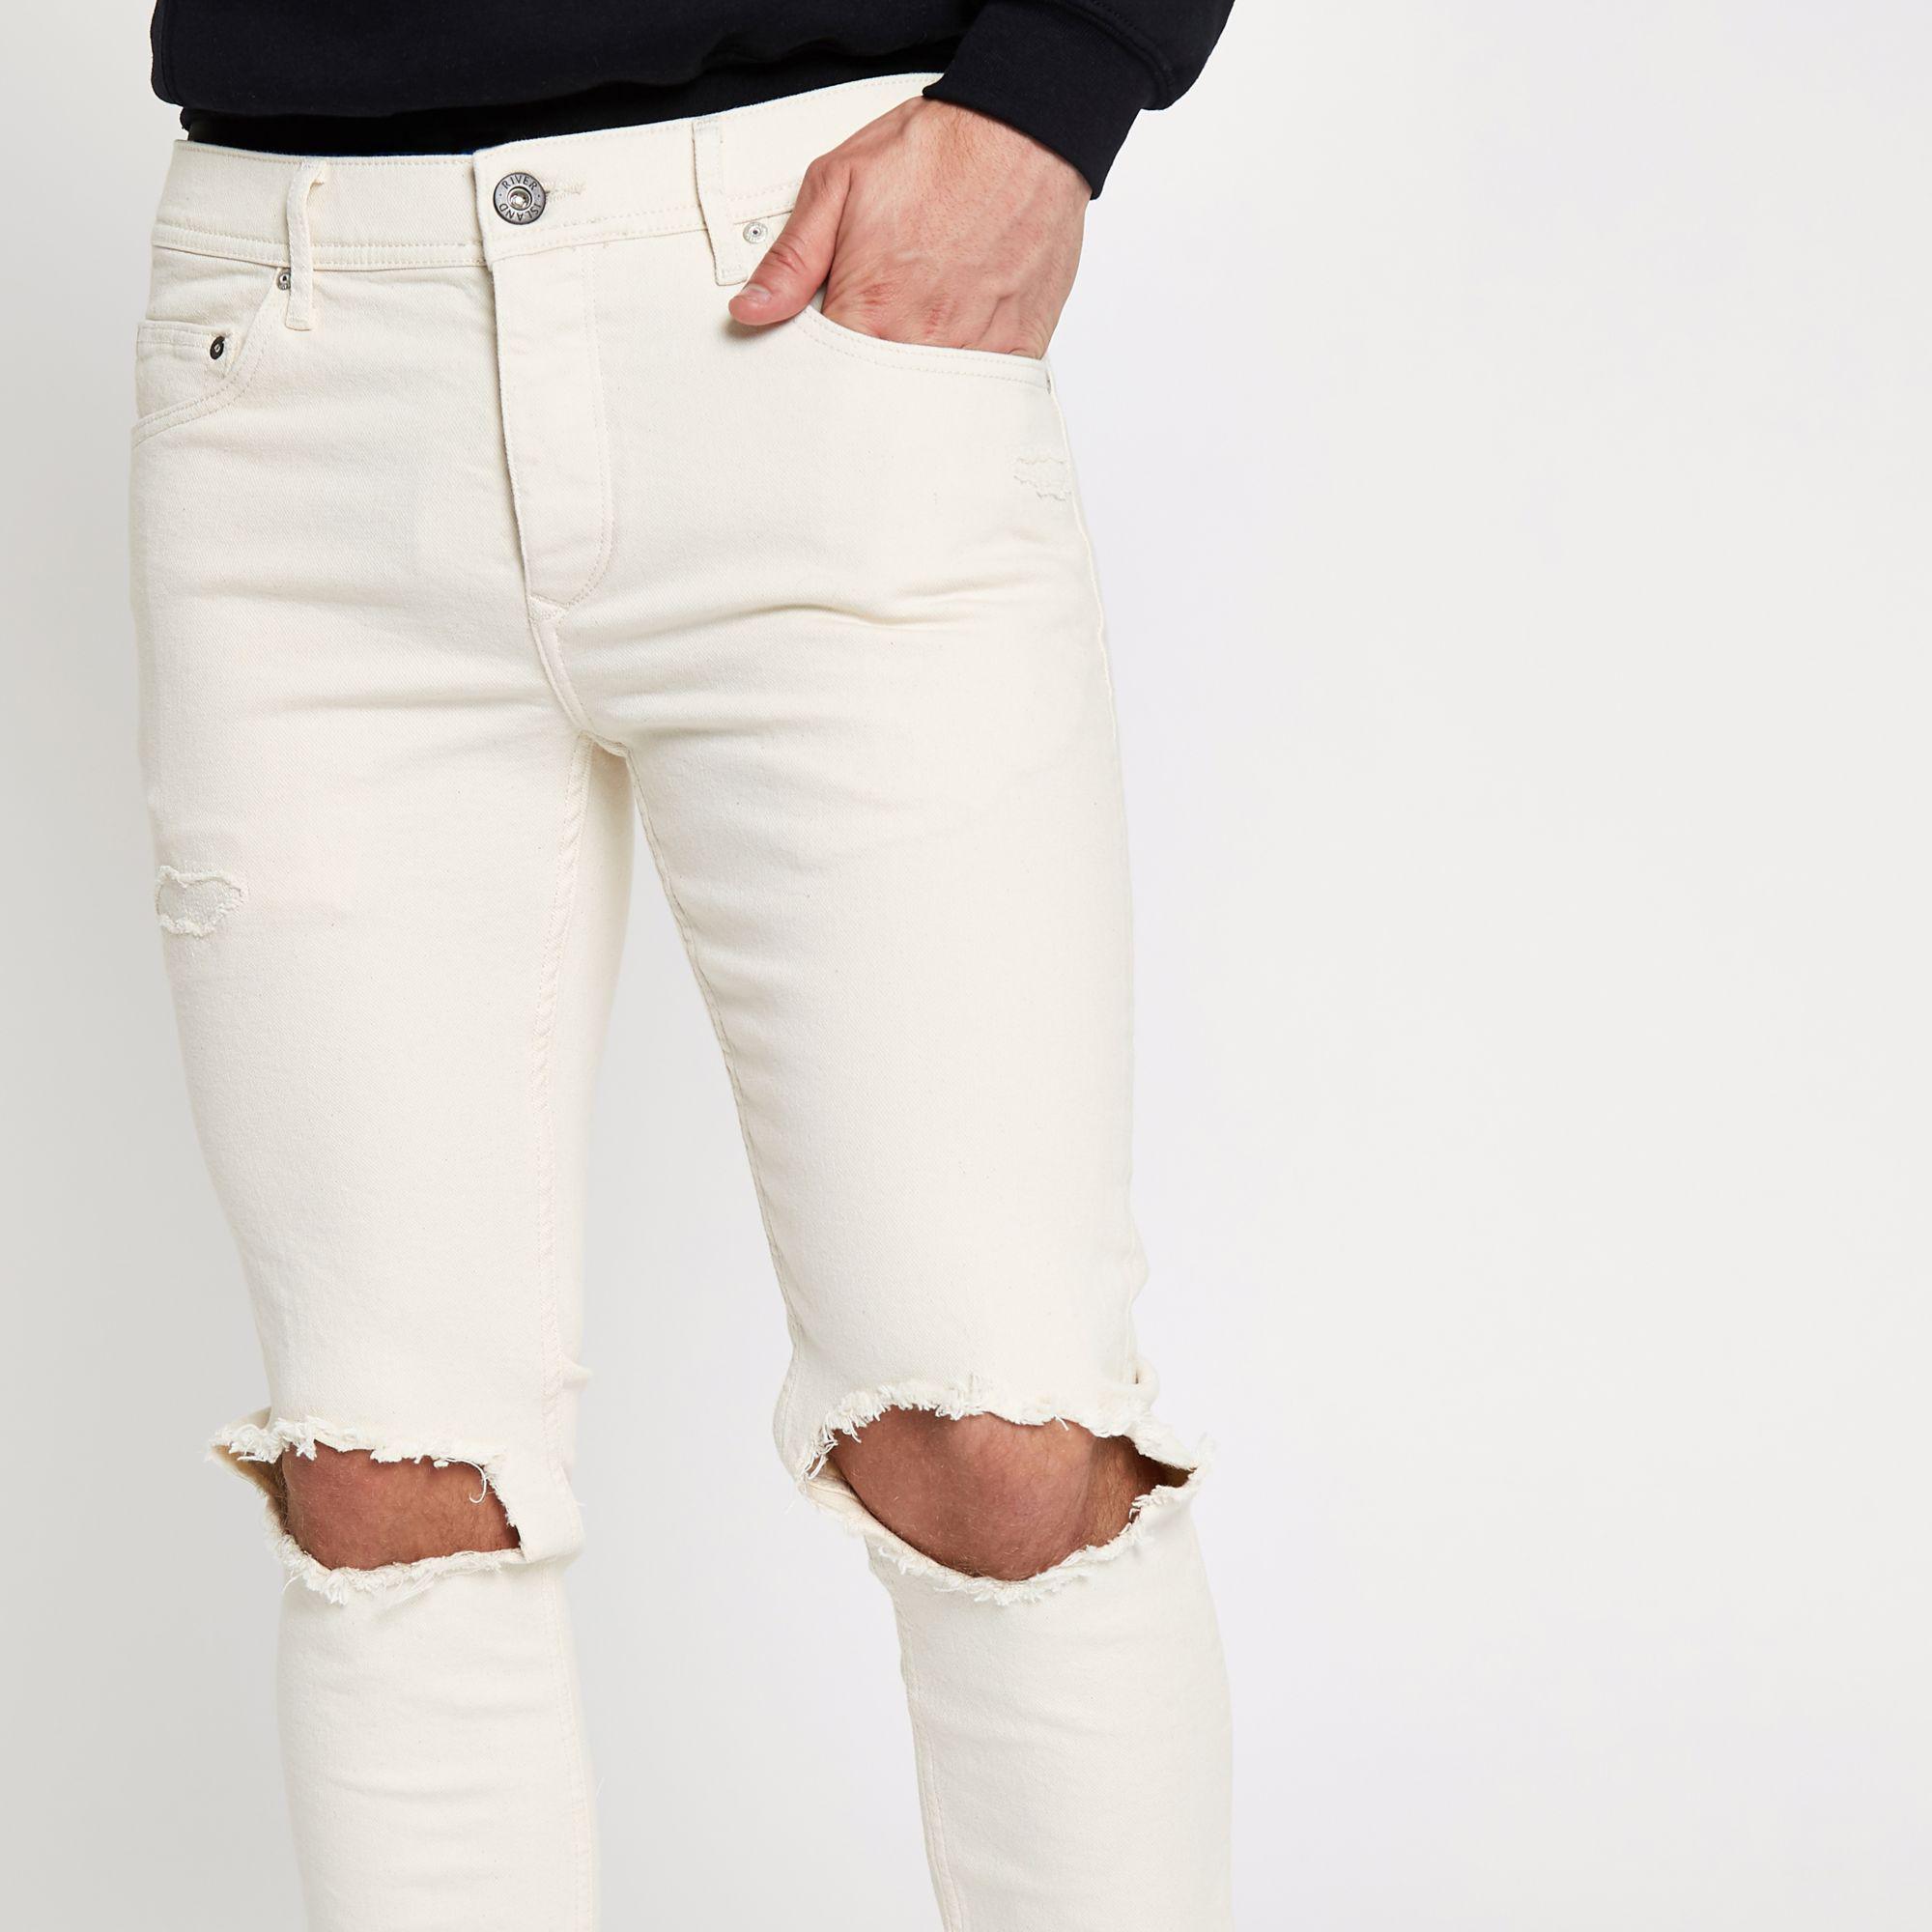 River Island Denim Cream Sid Ripped Skinny Jeans in Natural for Men - Lyst